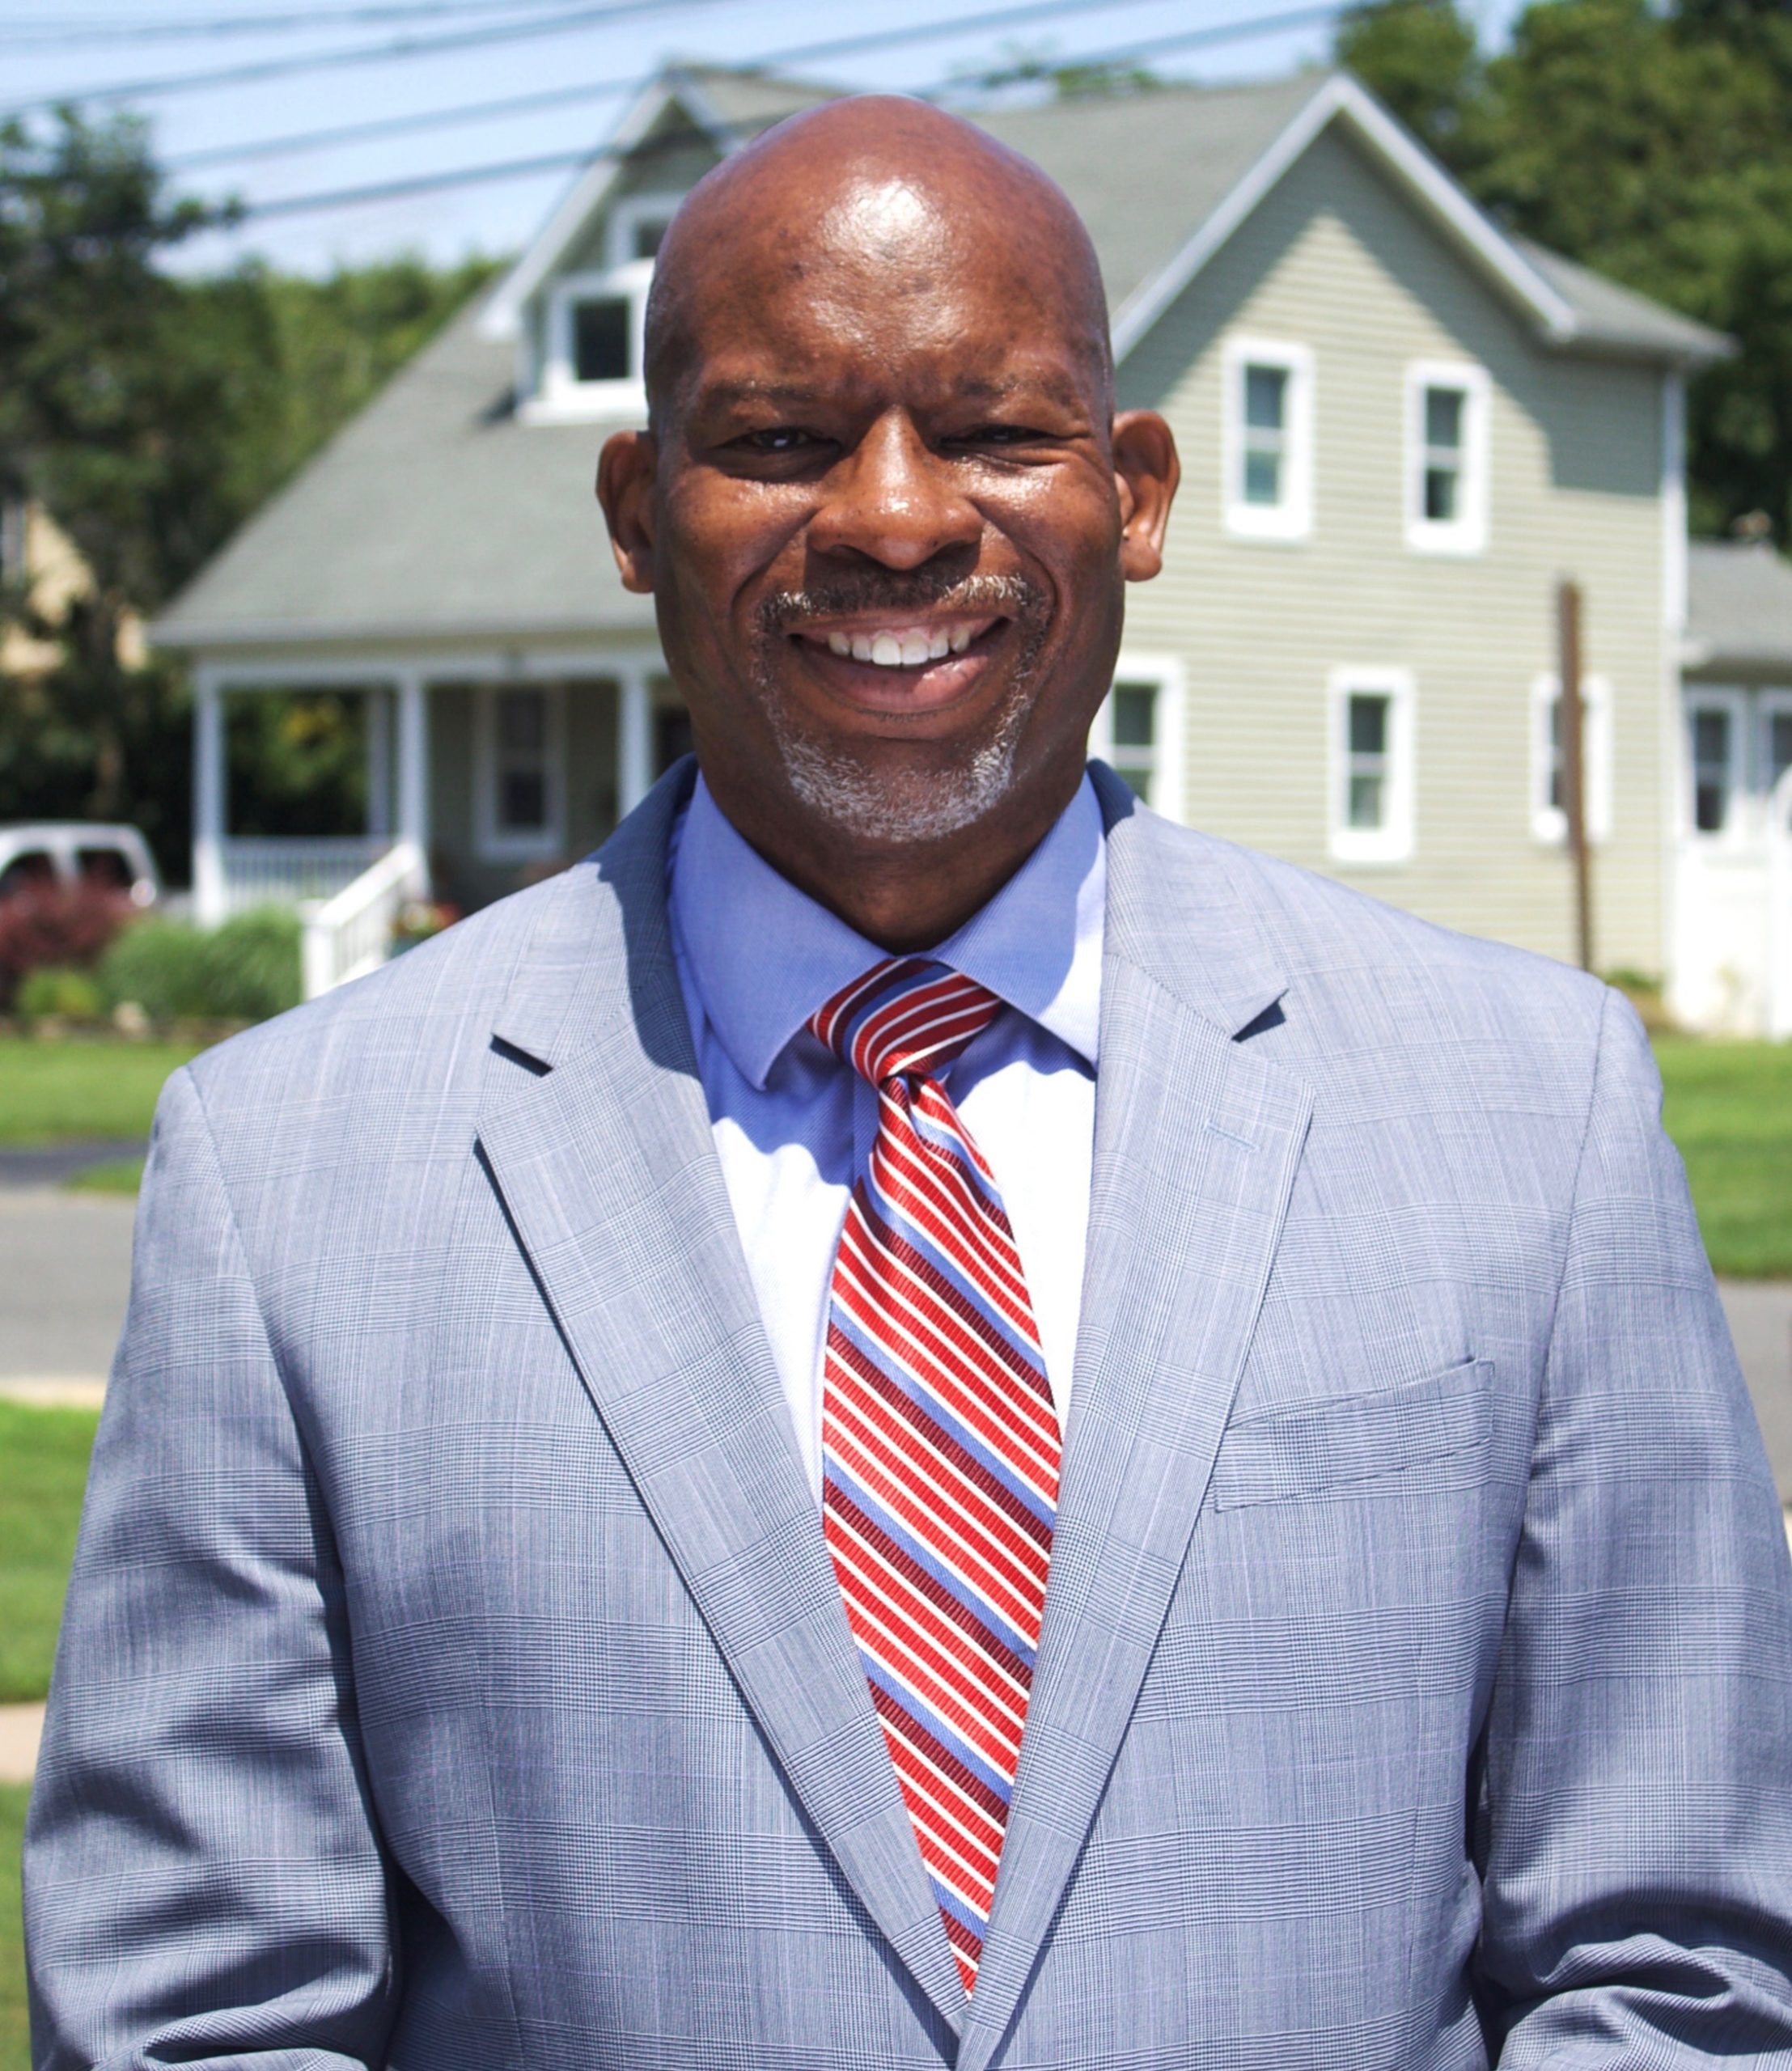 Keith Saunders has been named the assistant principal of Southampton High School.